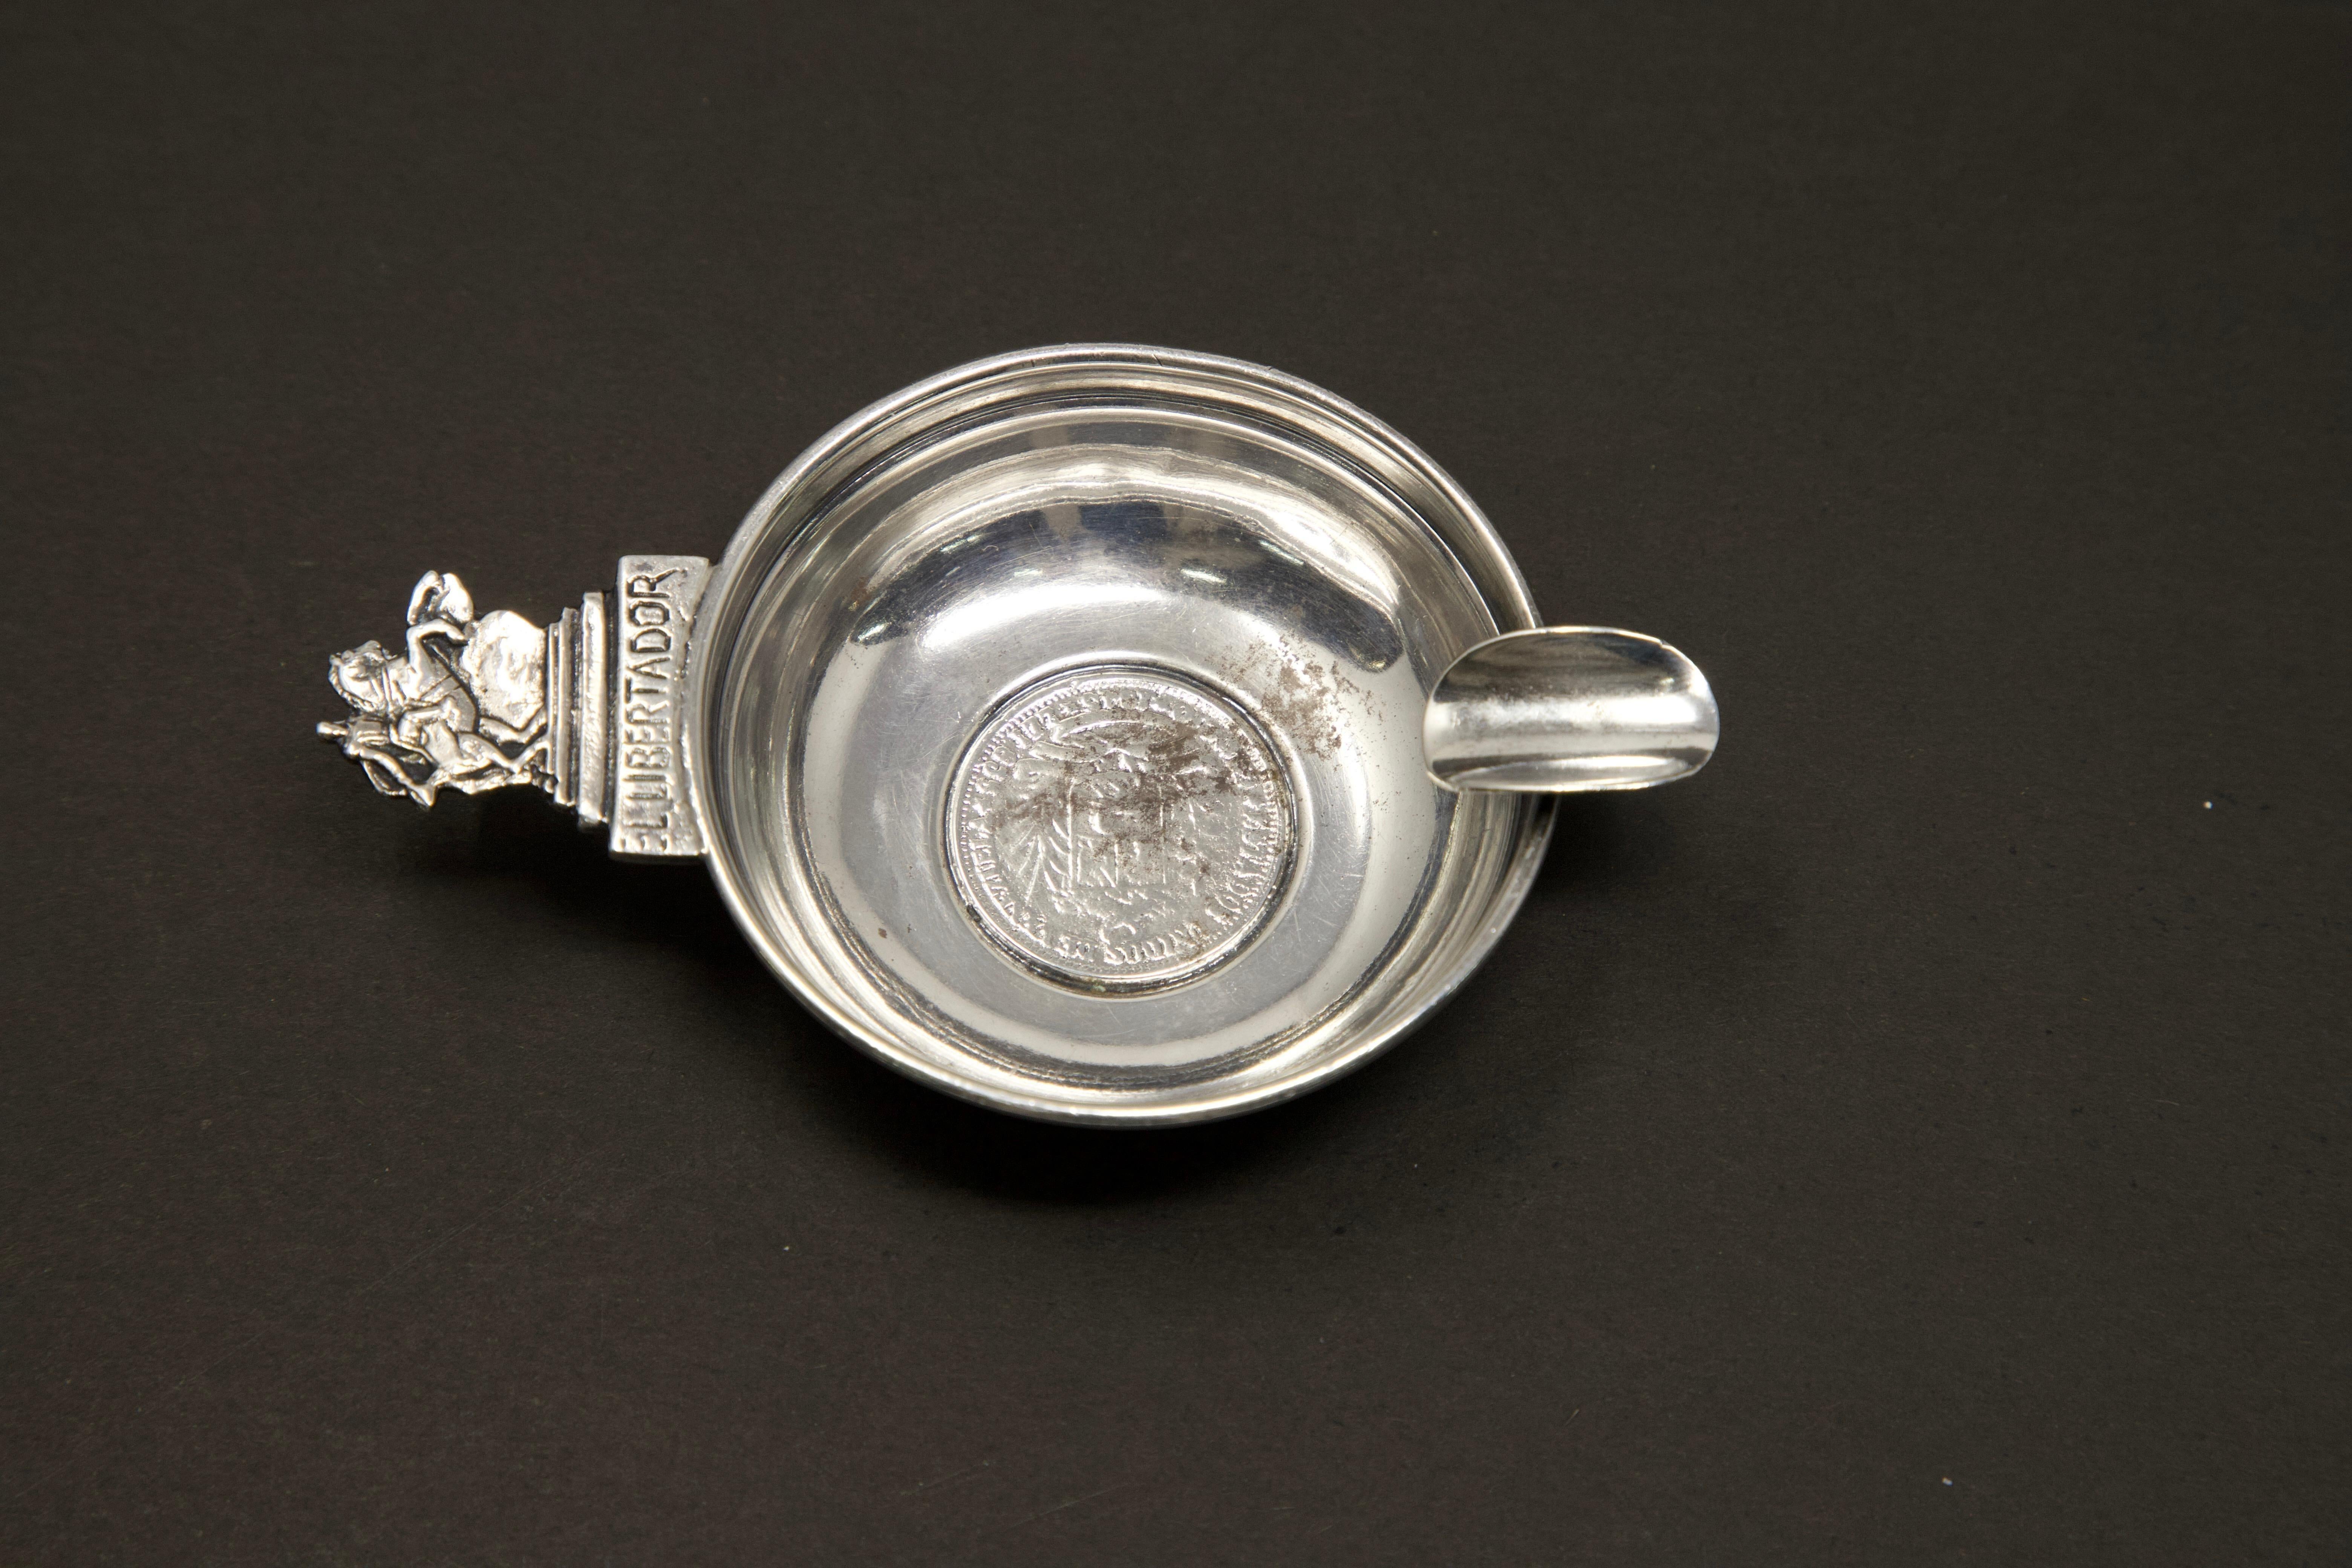 Offering this beautiful sterling silver El Libertador wine taster. The coin is hard to make out the interior however the back of the coin is marked Bolivar Libertador and it is from Venezuela. The handle is a man riding a horse and underneath is